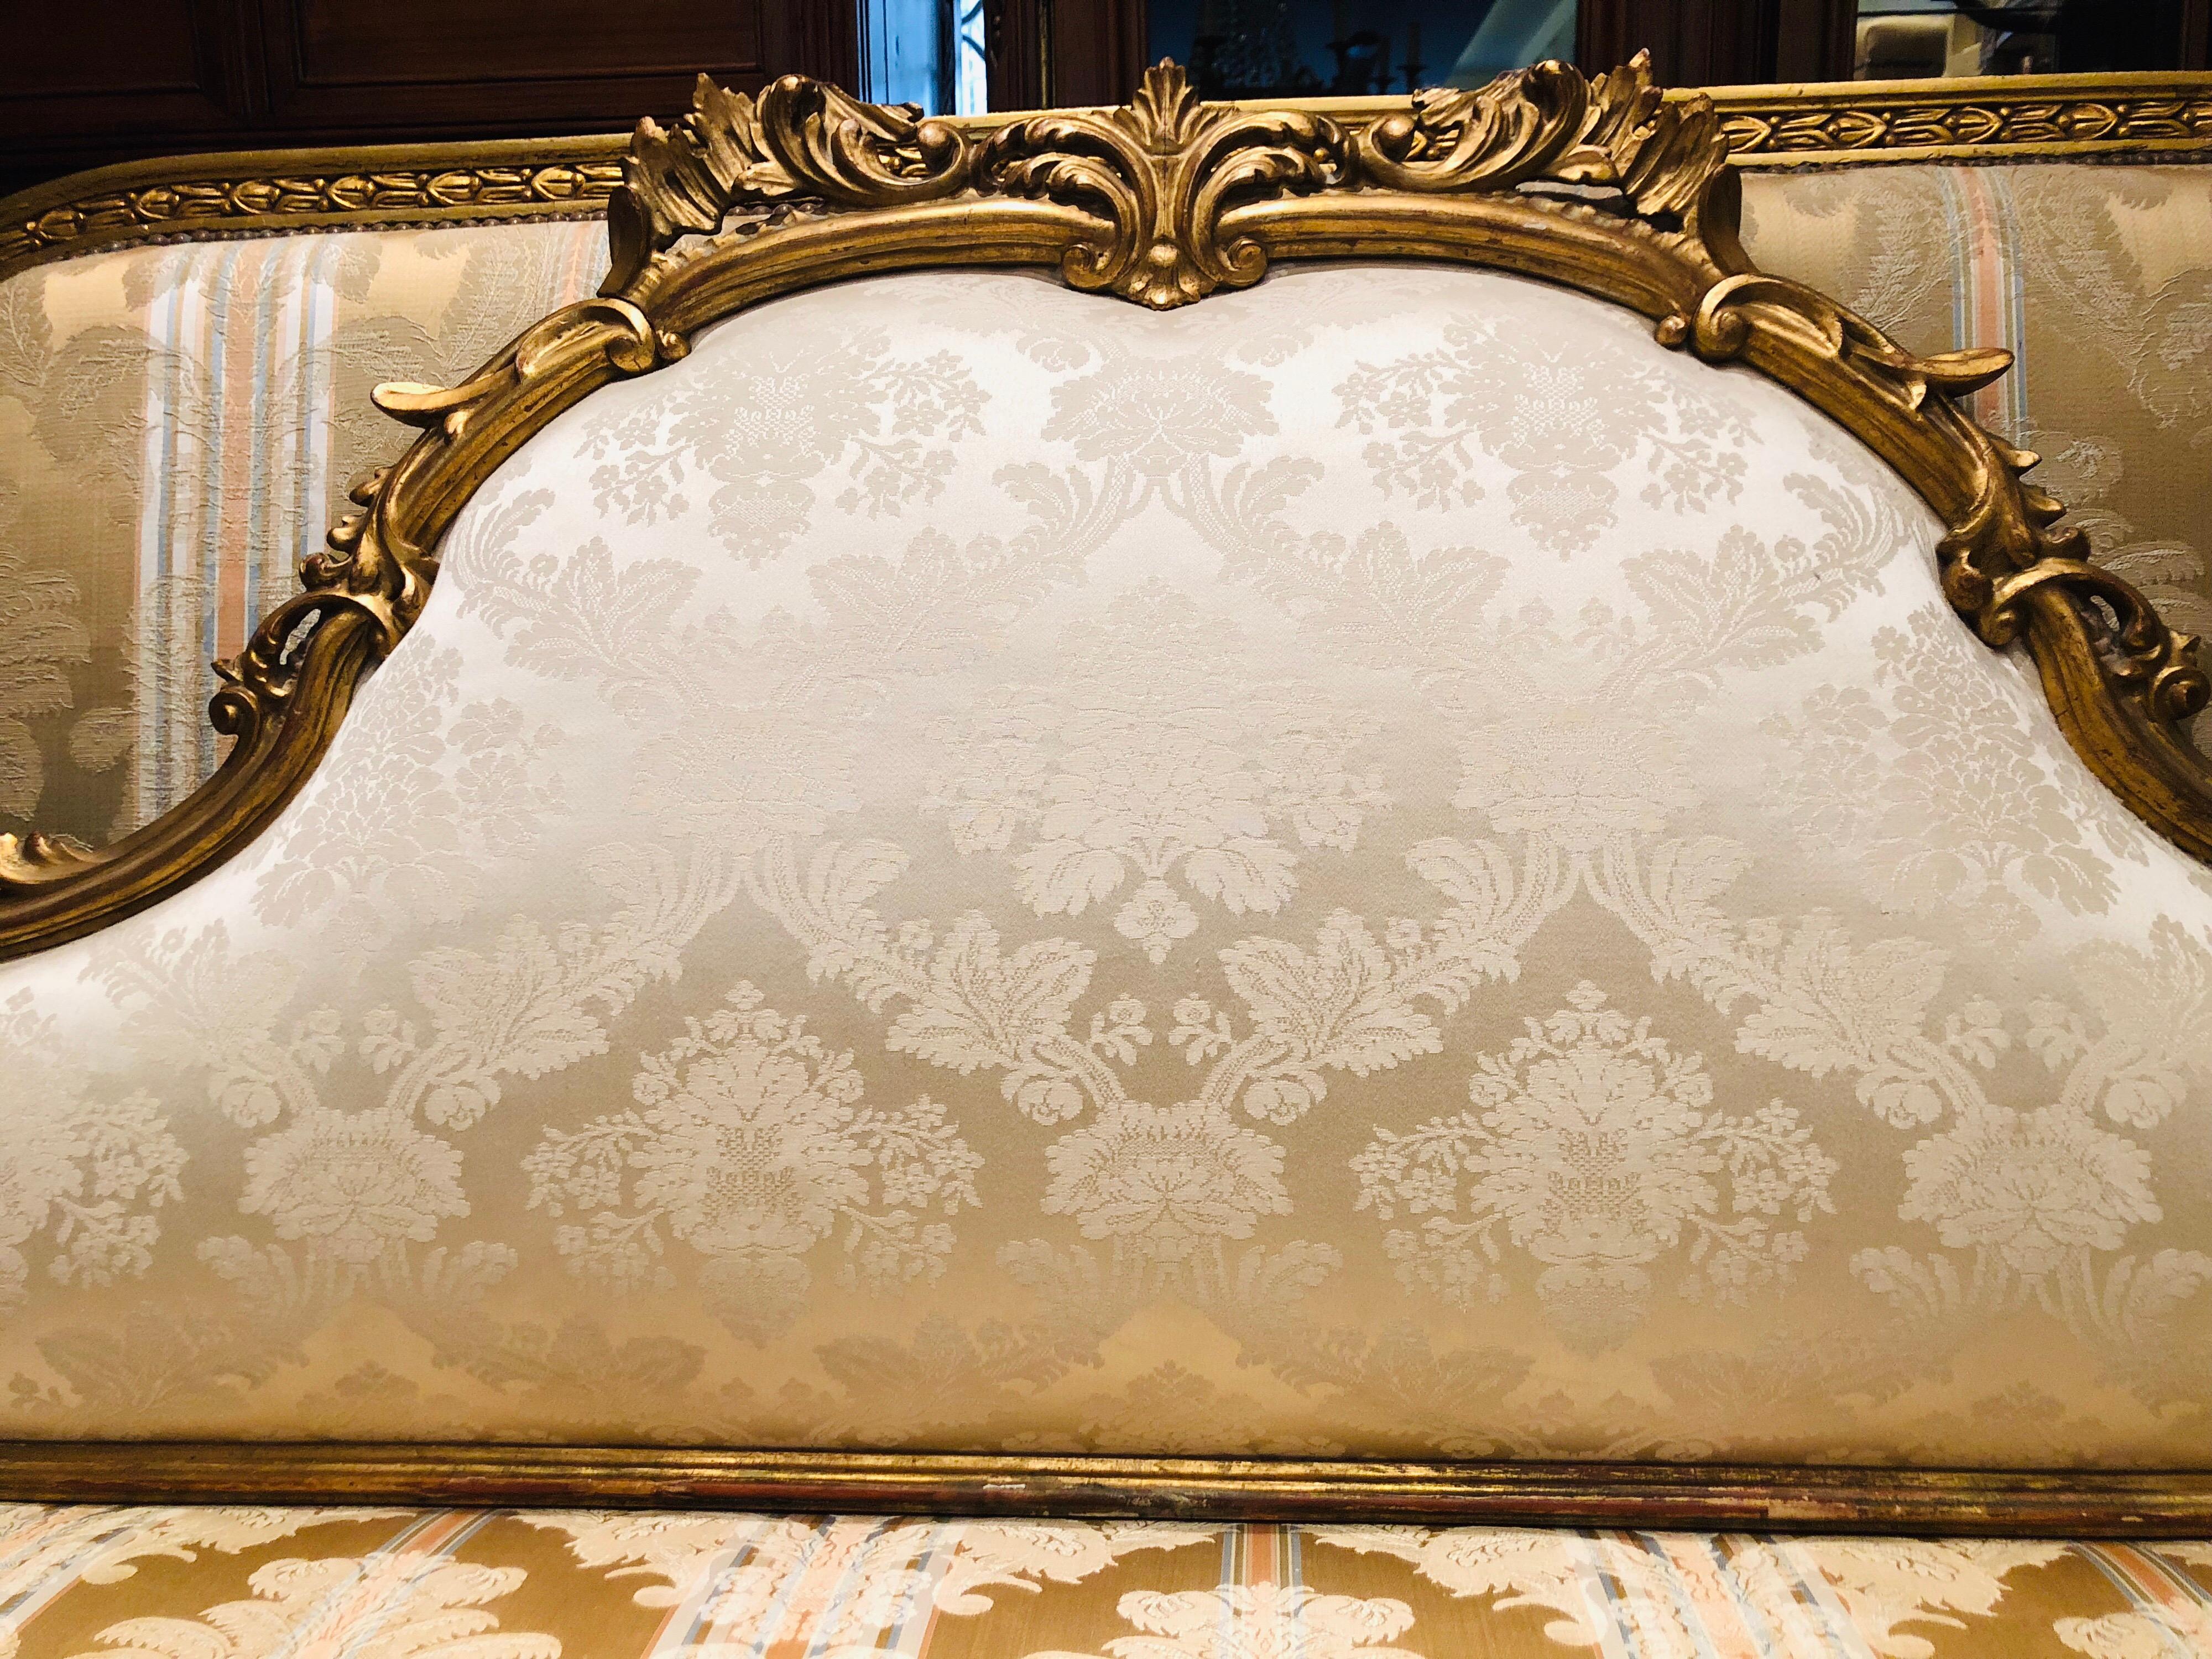 Very elegant giltwood and hand carved bedhead with silk upholstery in light beige.
France.